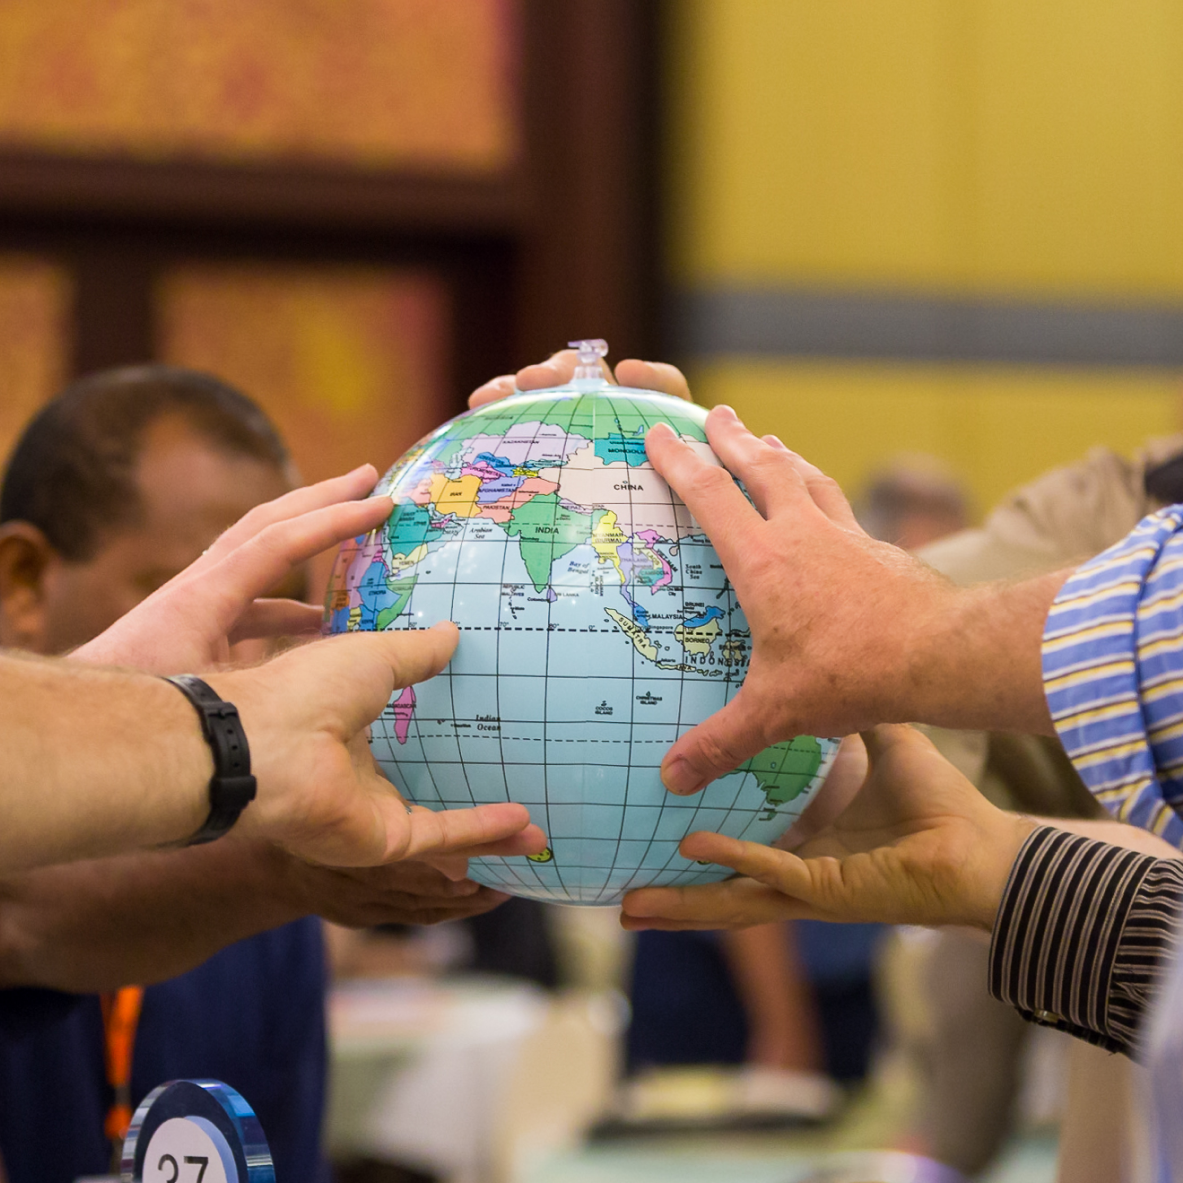 A group of people holding a globe while praying